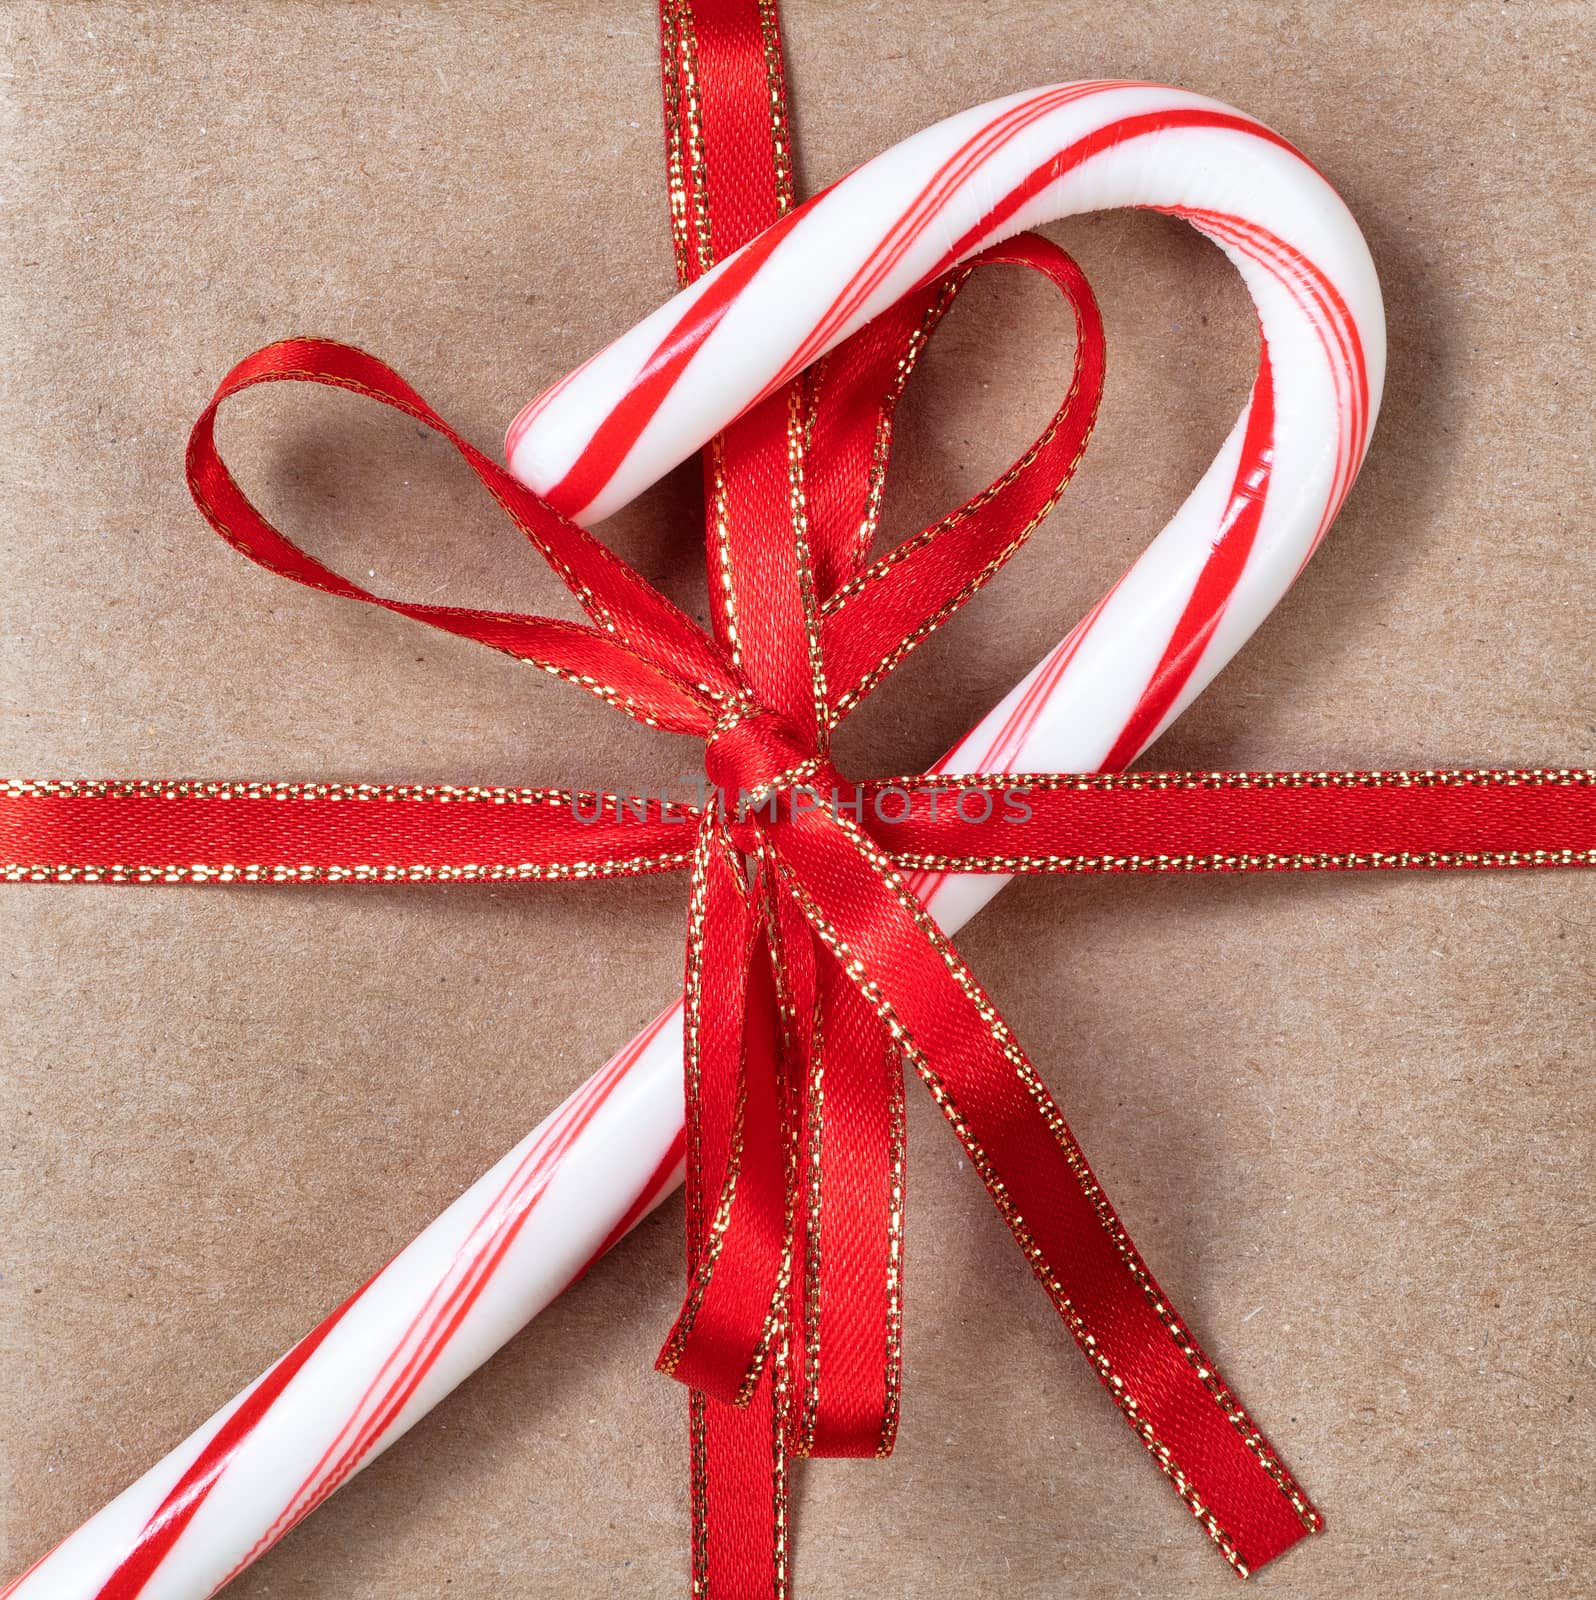 Filled frame background of Christmas gift and candy cane by tab1962